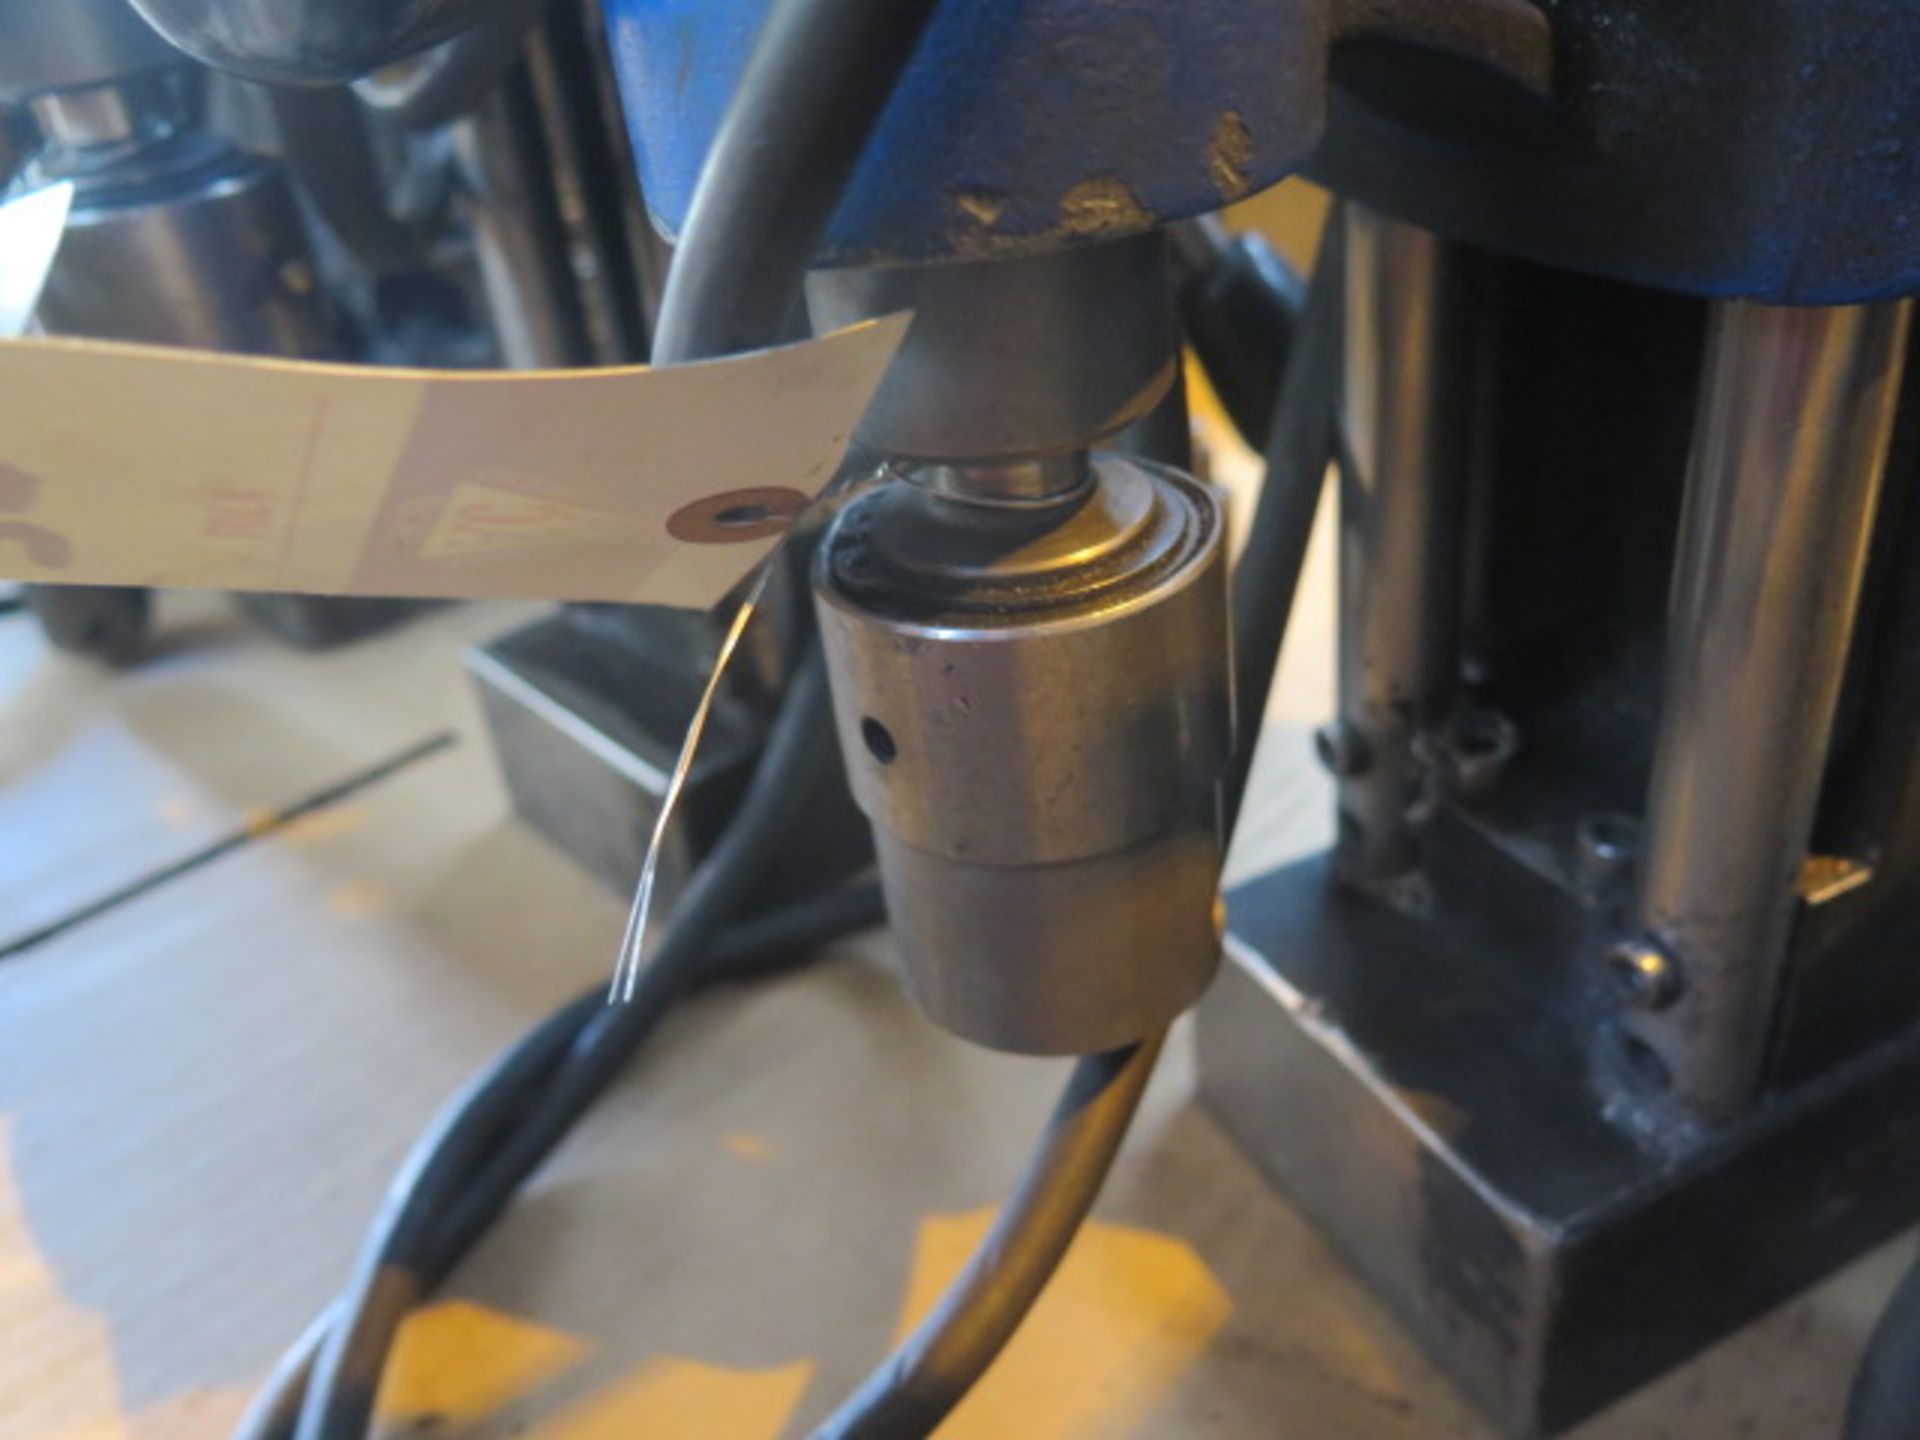 Steelmax D2 Magnetic Base Core Drill - Image 3 of 5